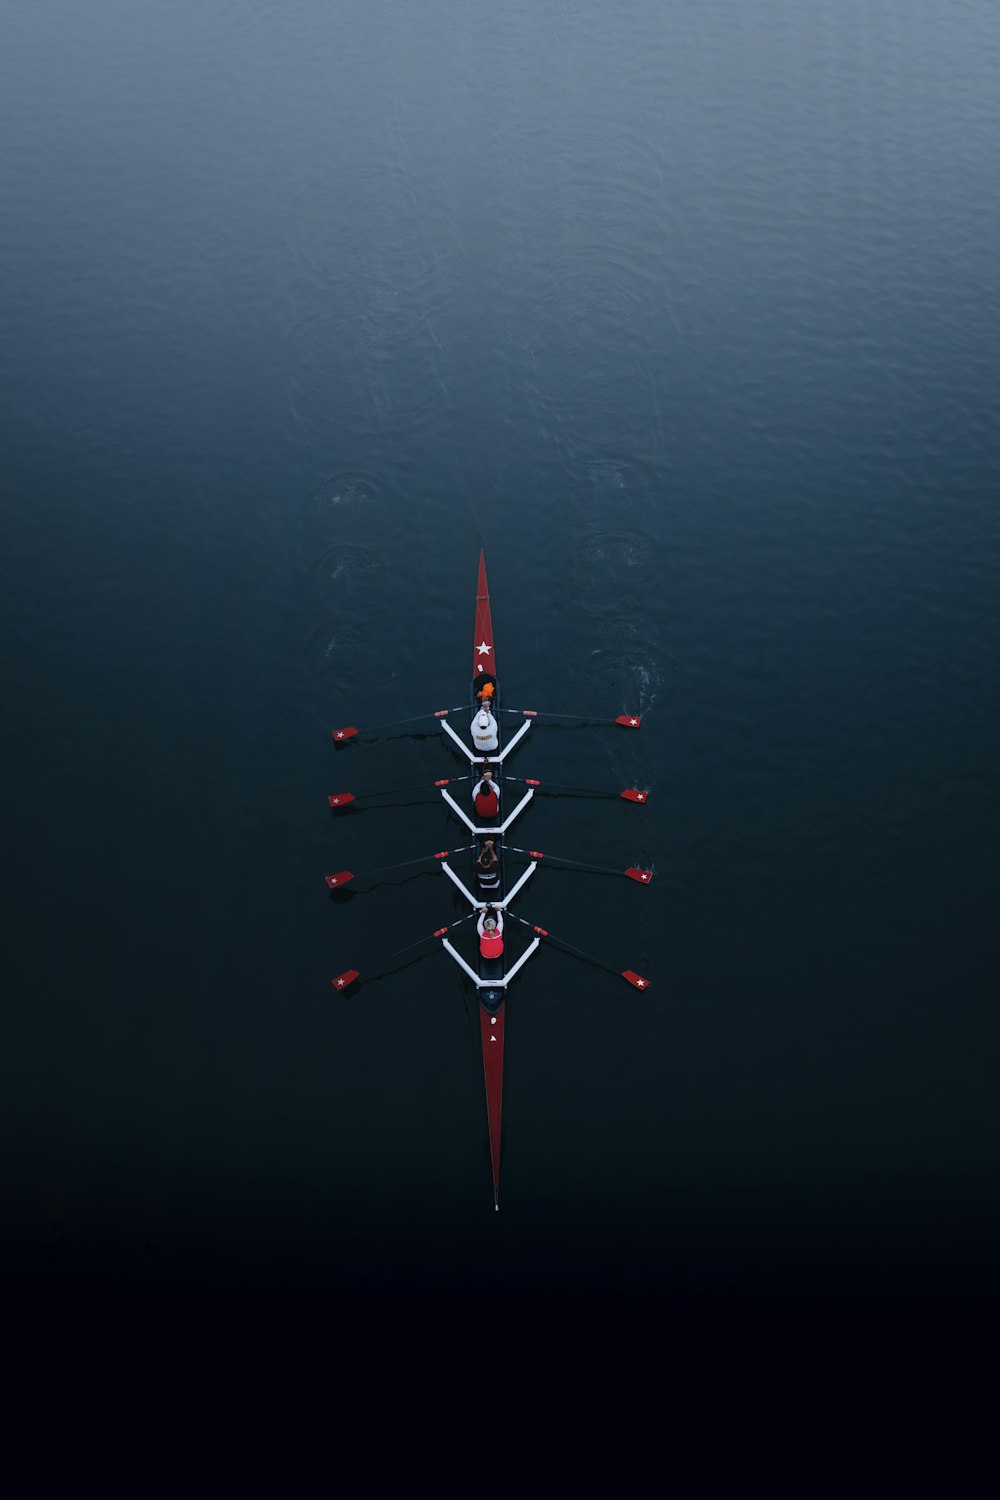 a row of boats floating on top of a body of water